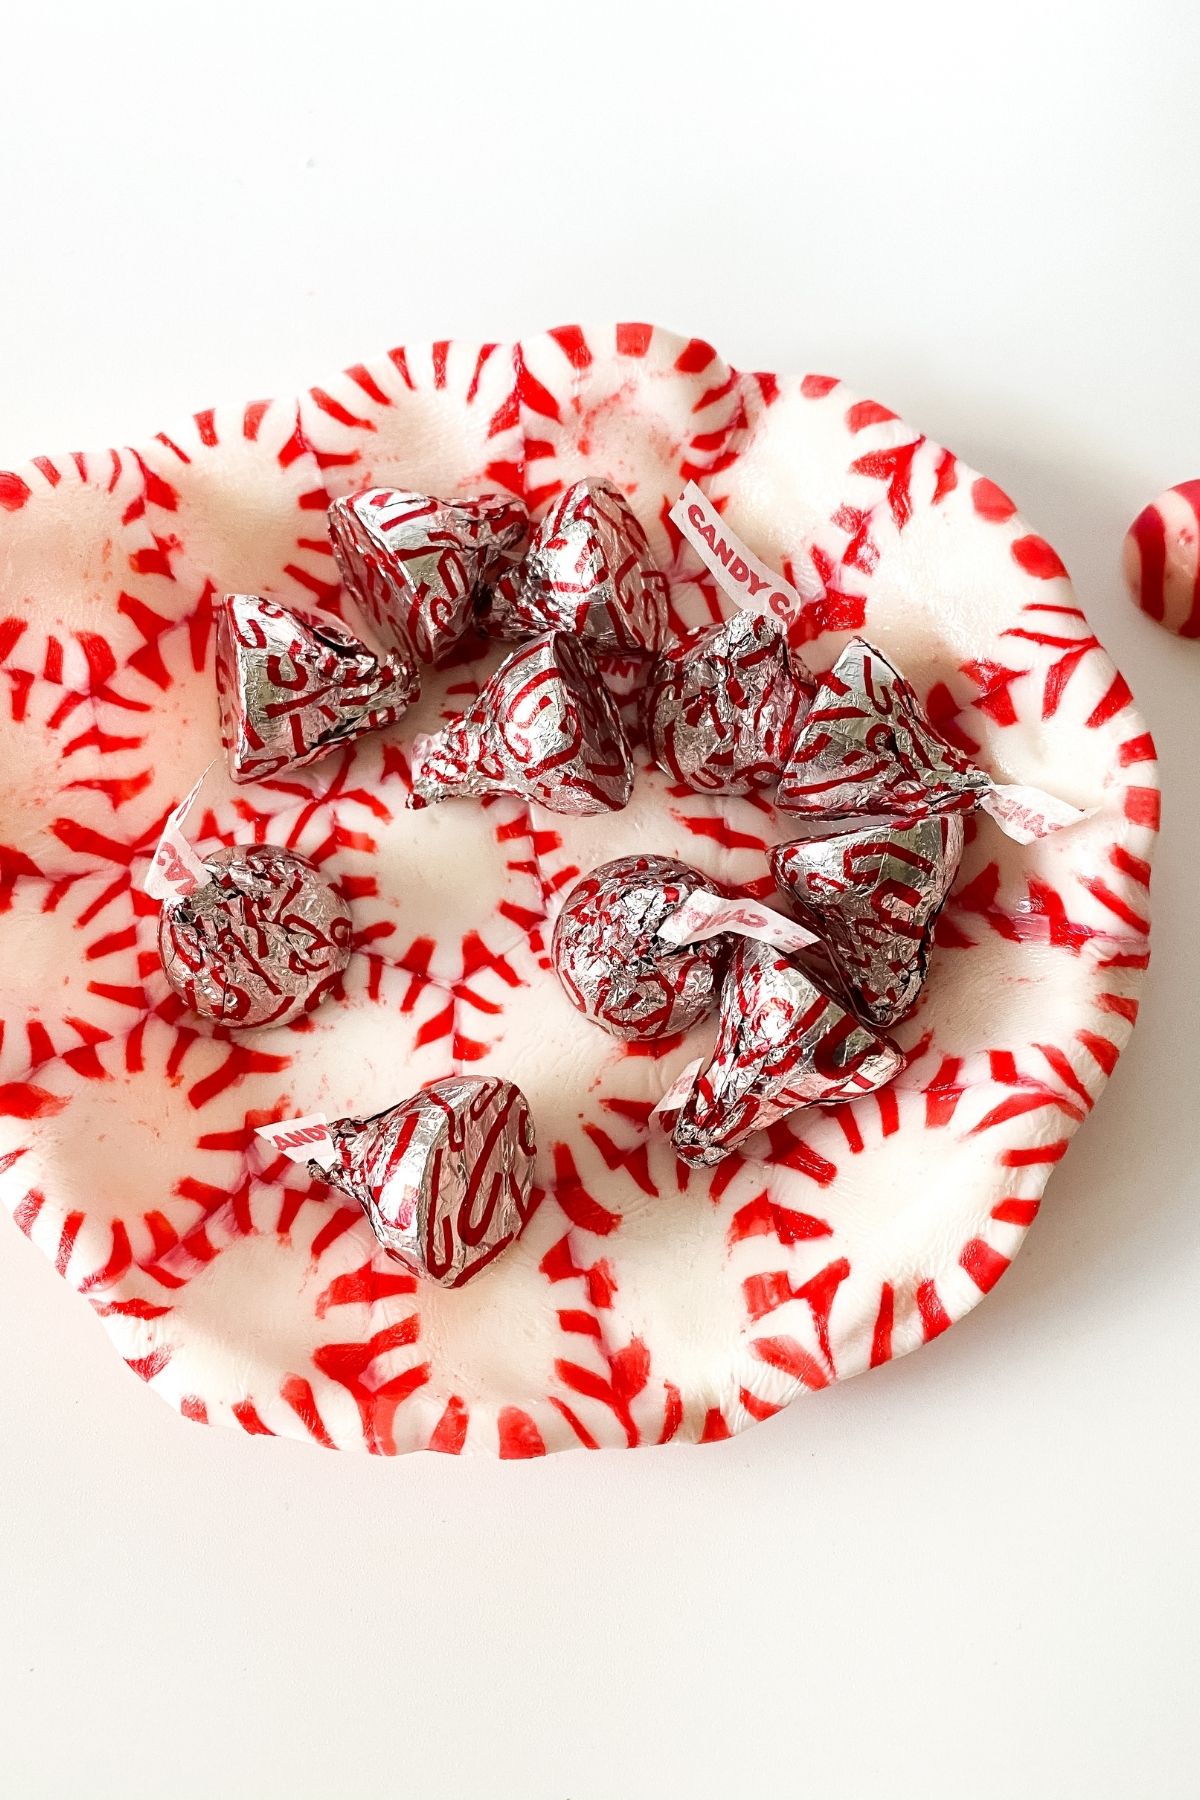 Peppermint candy bowl